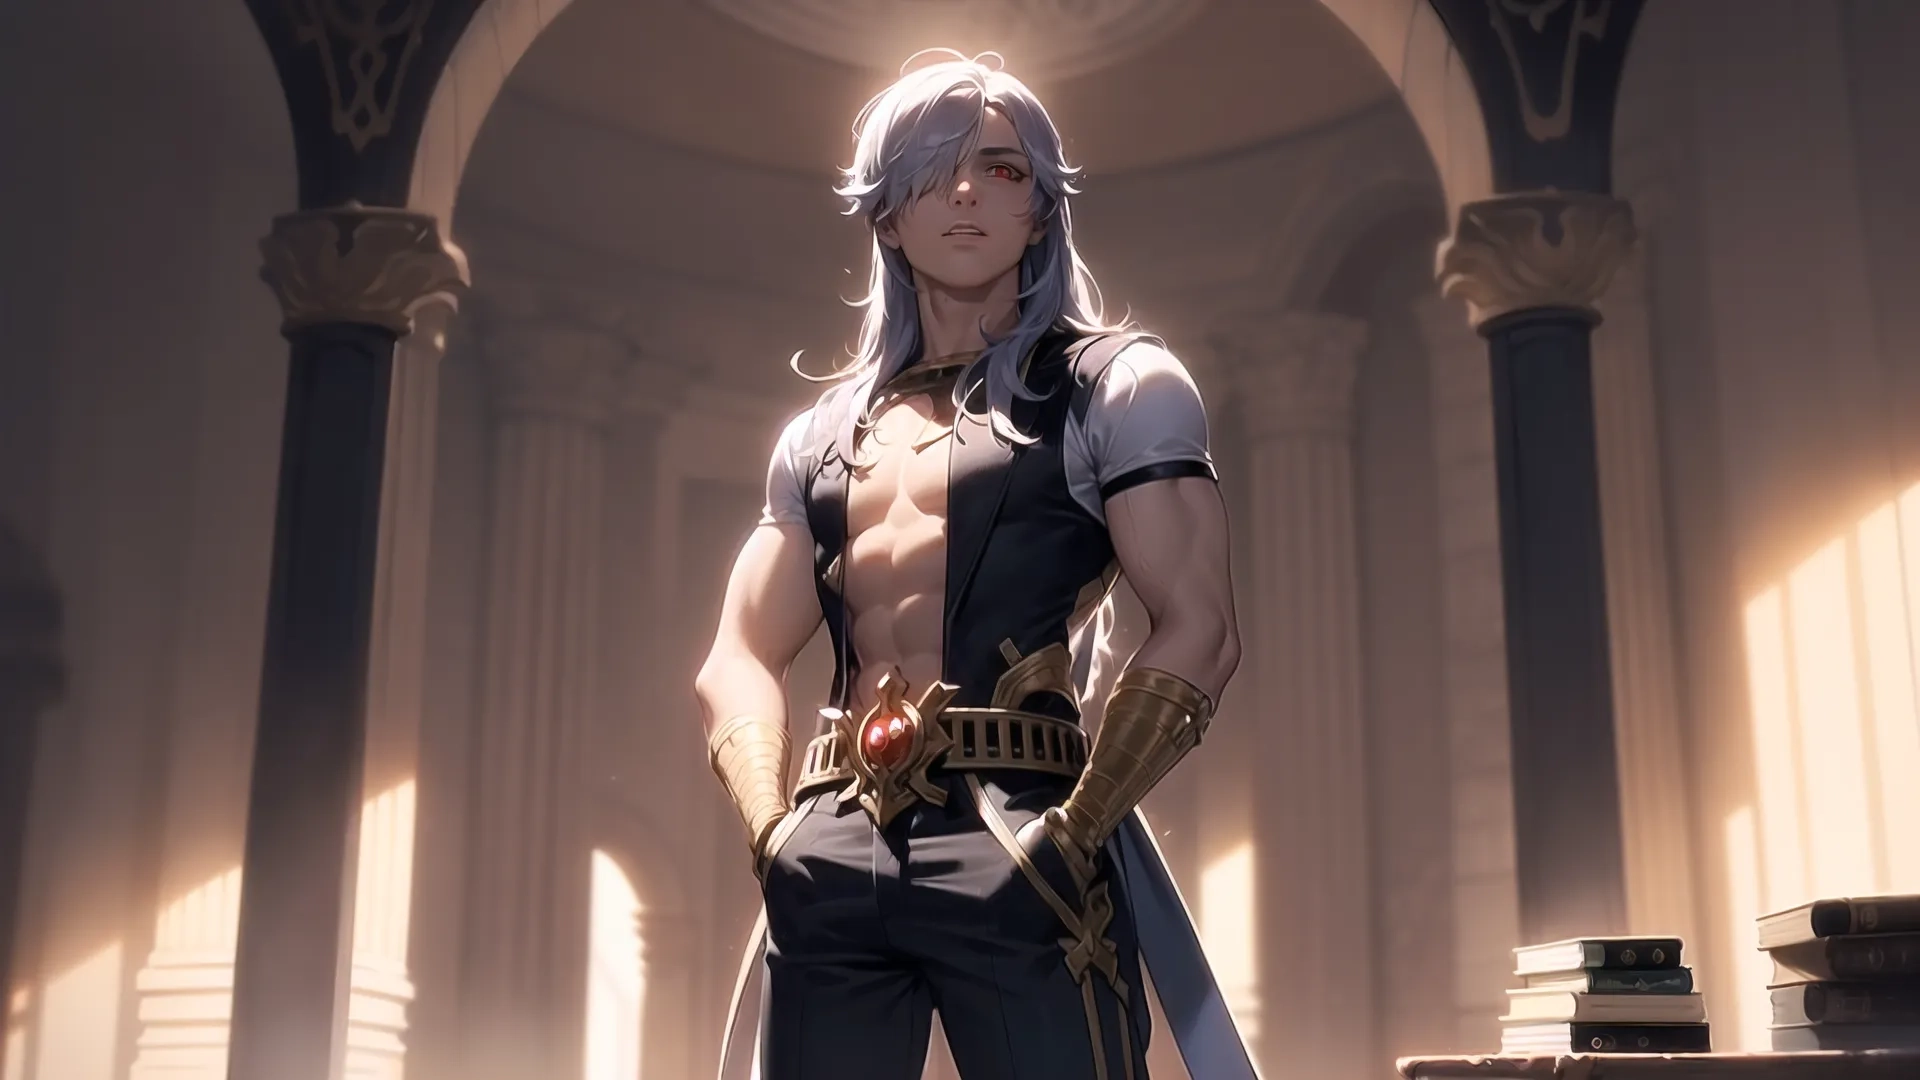 a male anime character is holding swords and an apple in one hand and a building in the otherhand with pillars behind him, and columns with arches and pillars behind
